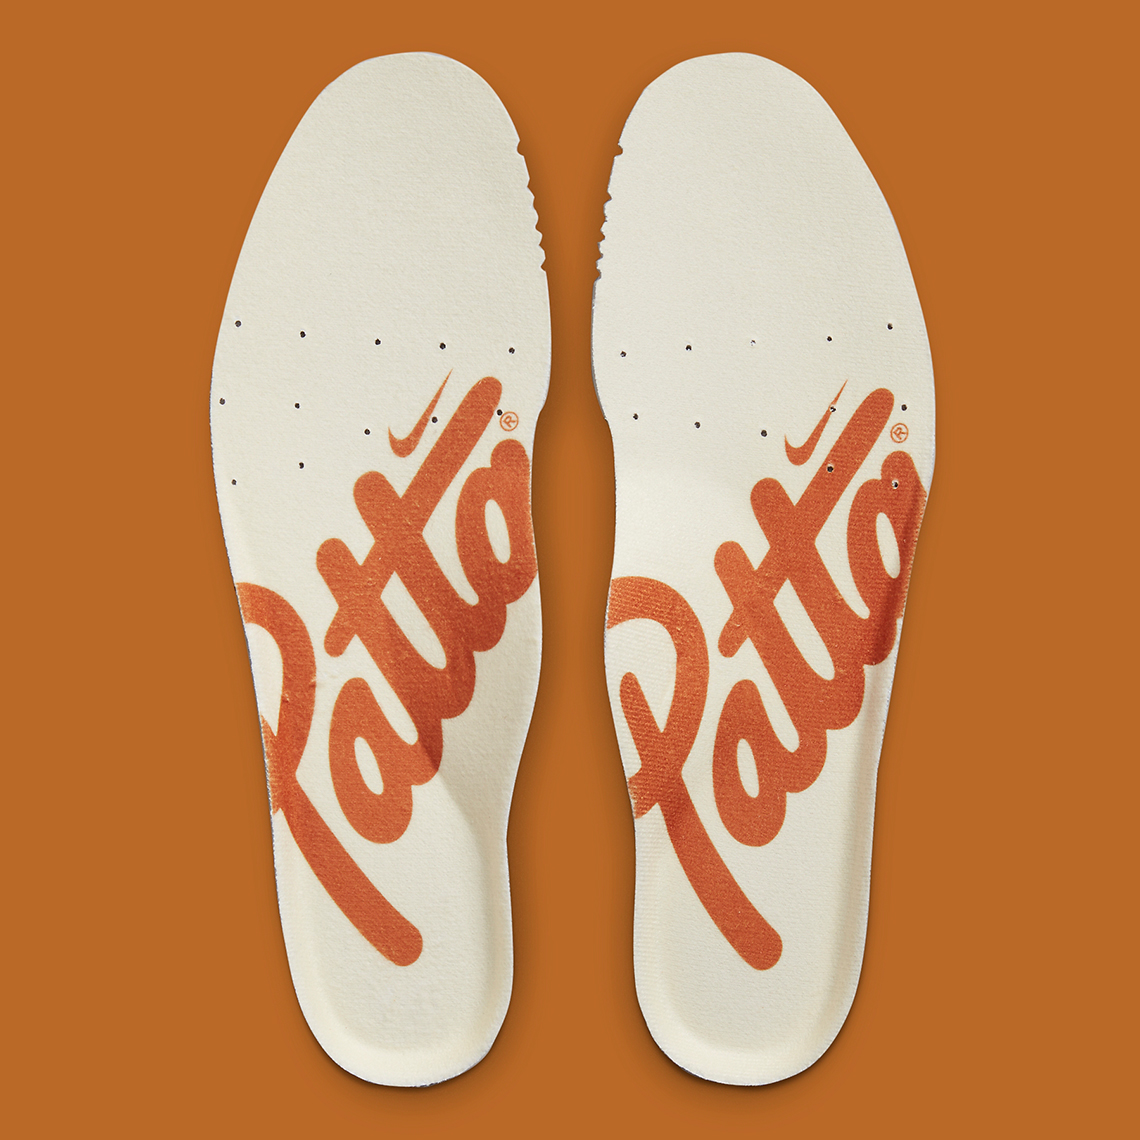 Patta nike spring blade running shoes sale cape town Dh1348 001 3